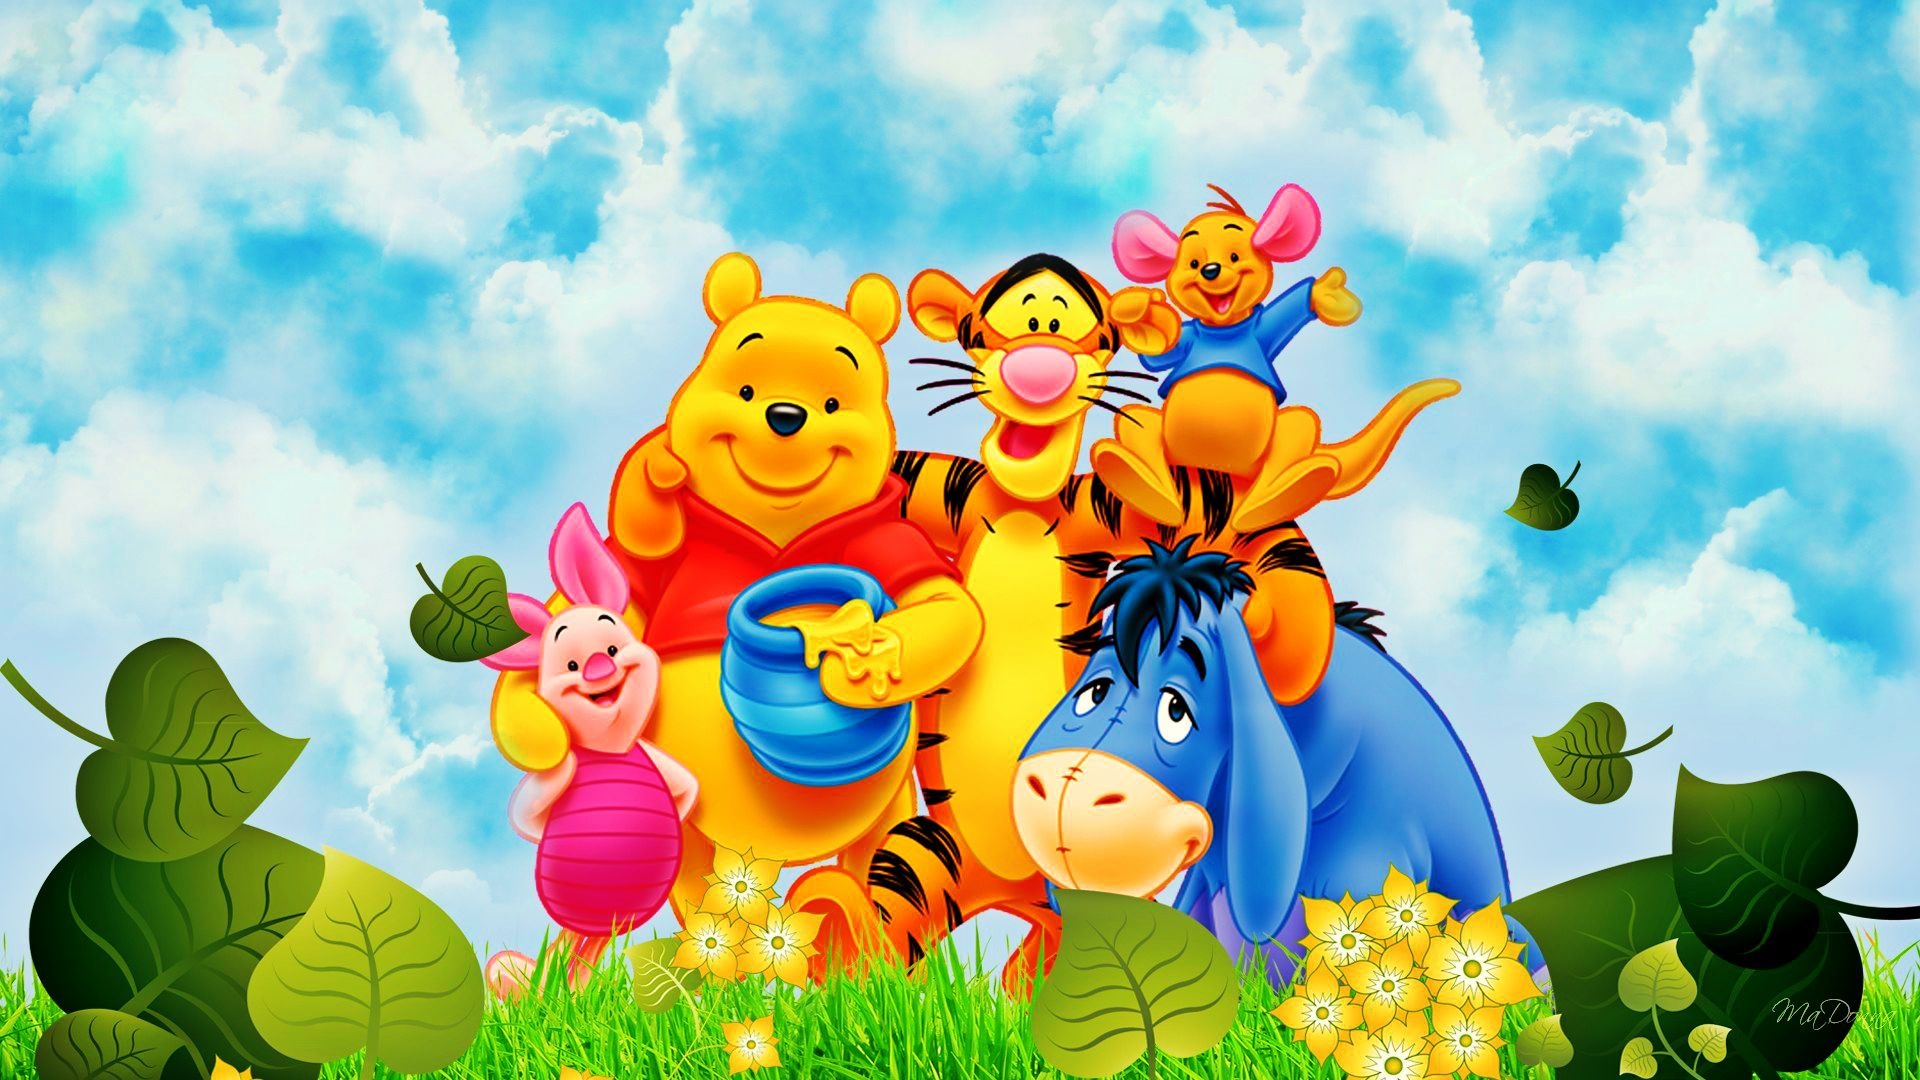 Baby Roo, Winnie-the-Pooh animation, Winnie the Pooh wallpapers, None specified, 1920x1080 Full HD Desktop